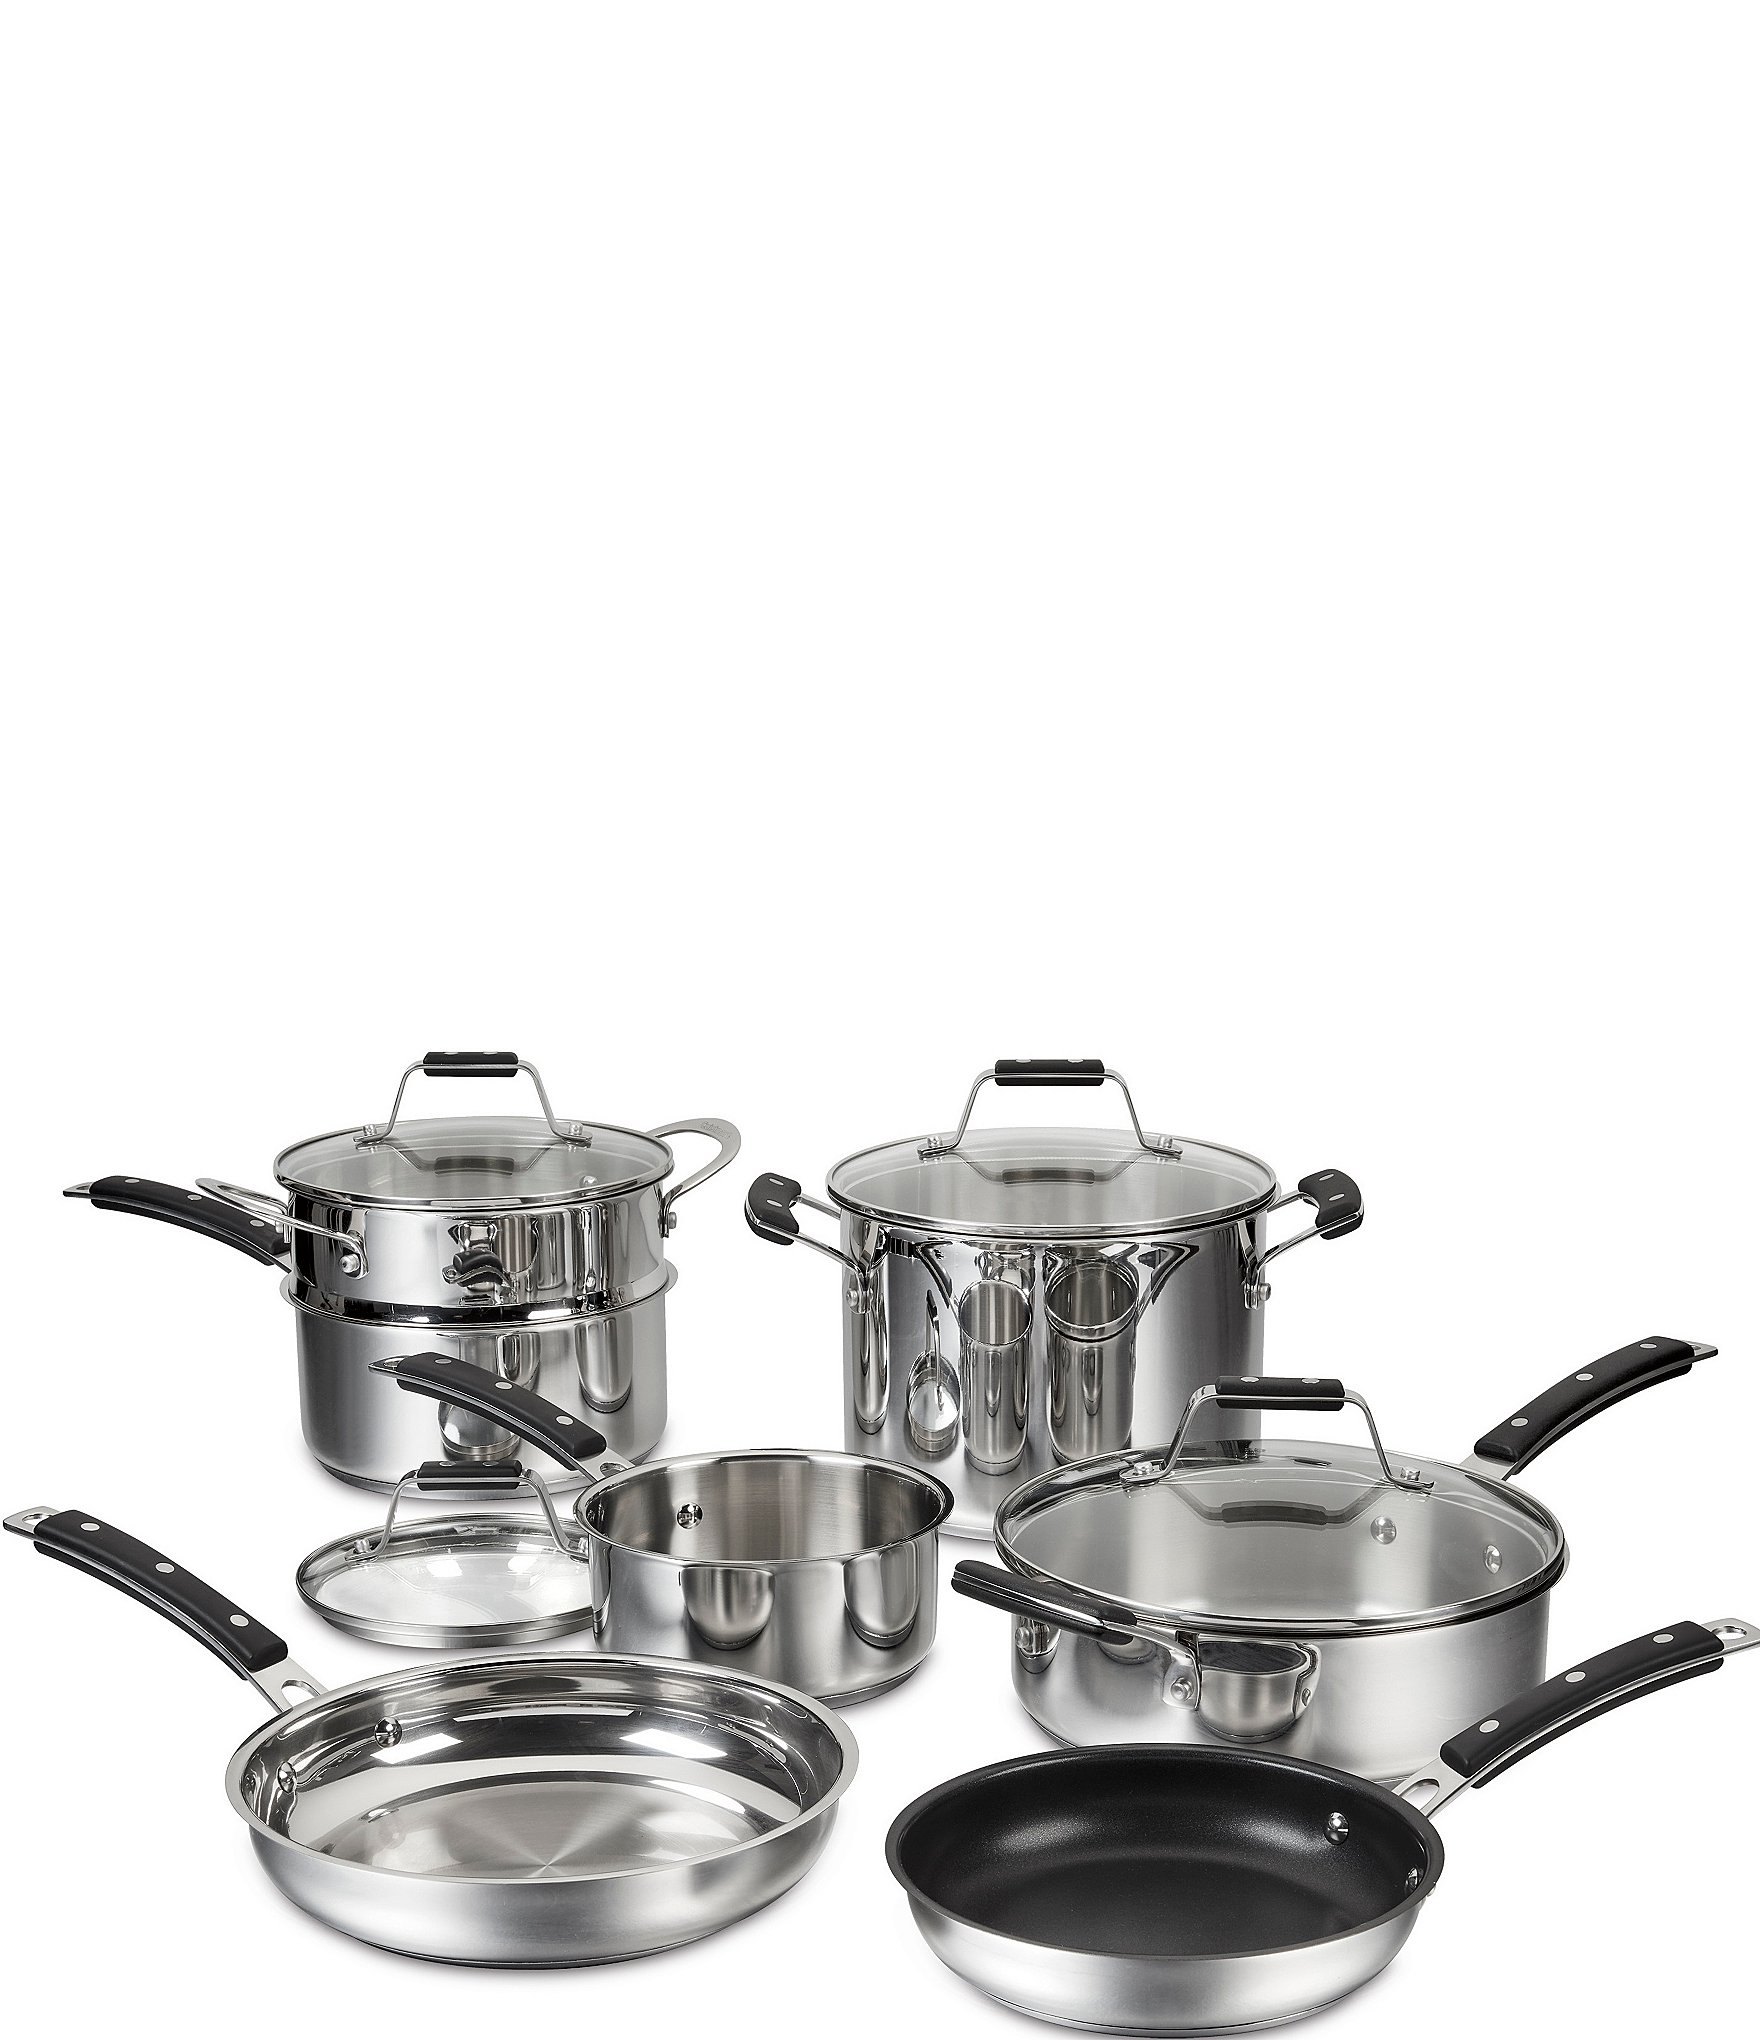 https://dimg.dillards.com/is/image/DillardsZoom/zoom/cuisinart-heritage-stainless-collection-11-piece-cookware-set/00000000_zi_083cd666-d053-48a3-8a5a-470b32ac65ed.jpg